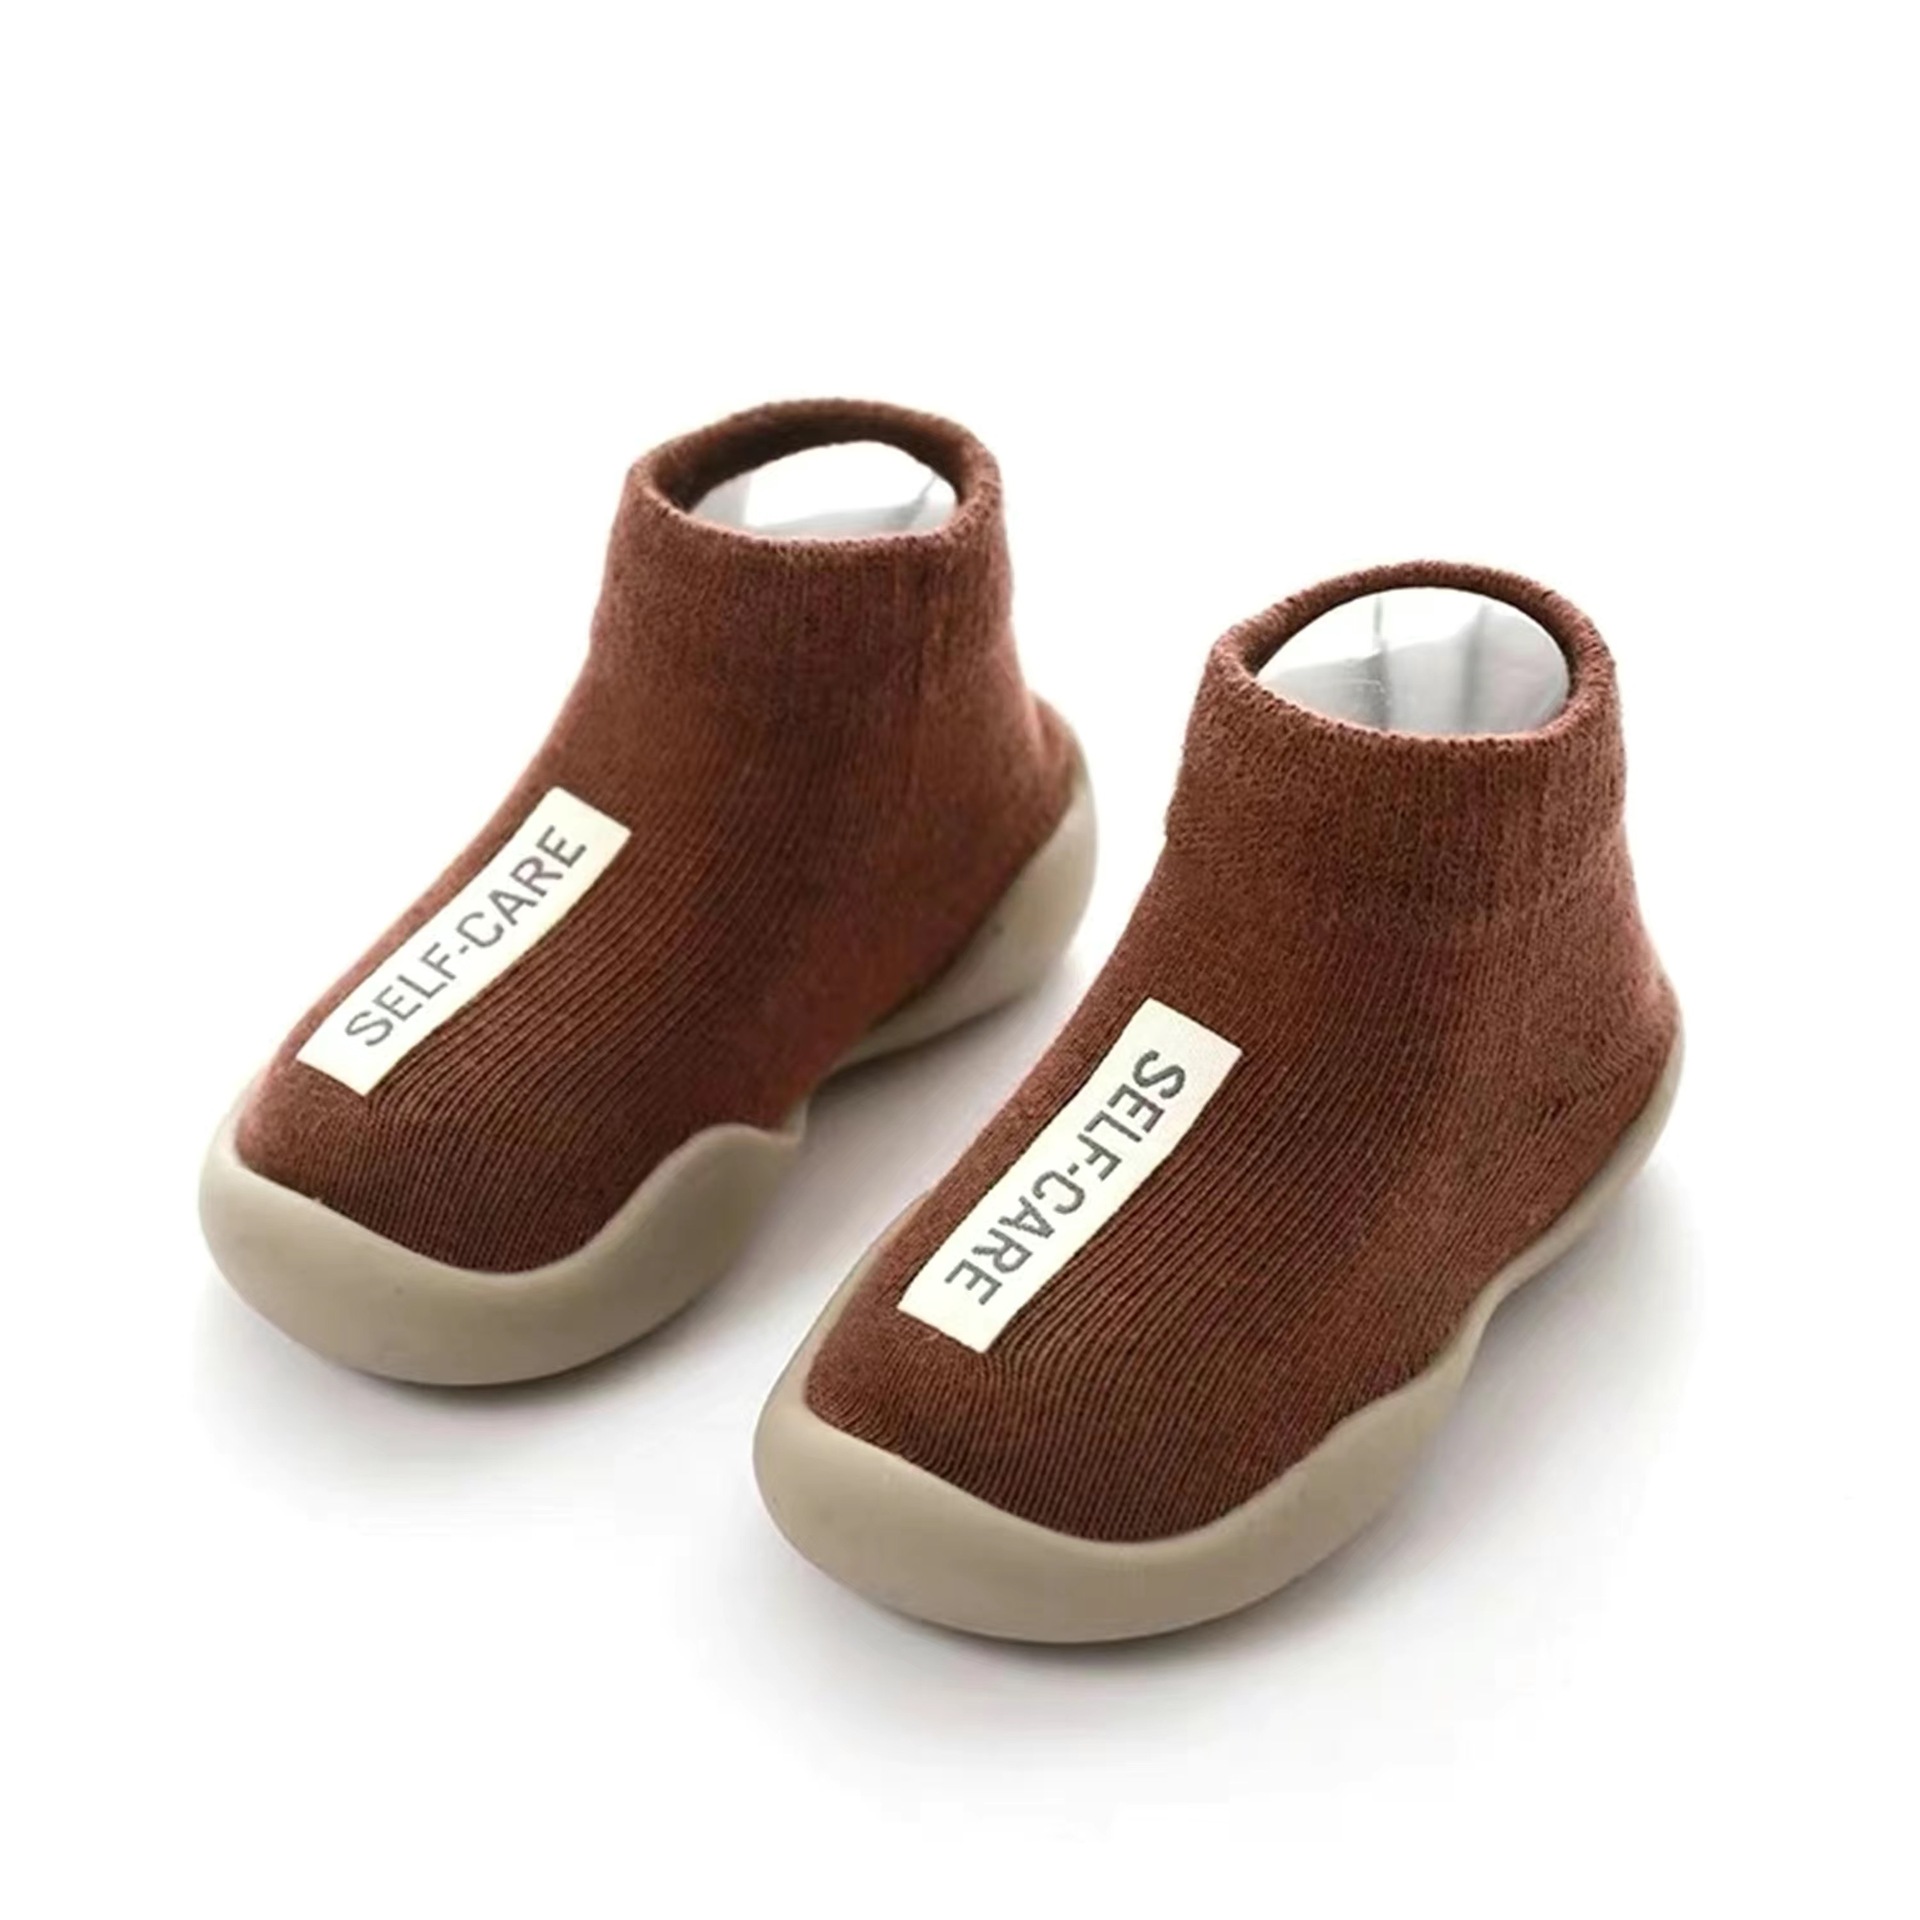 Baby Toddler Shoes Soft Sole Non-slip Spring and Autumn Baby Socks Shoes Indoor and Outdoor Walking Early Education Infant Breathable Shoes and Socks